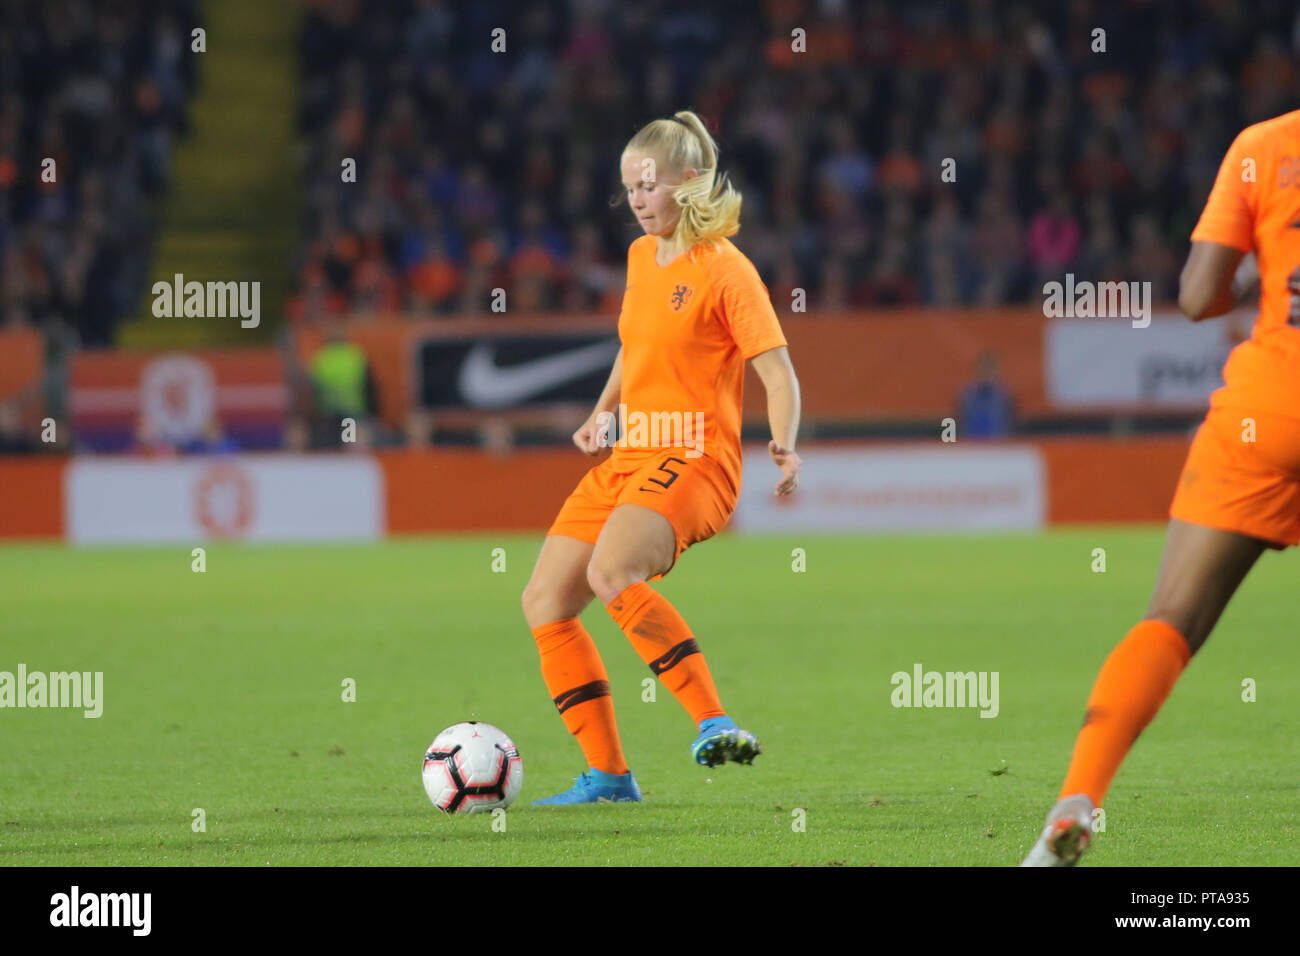 Netherlands midfield, Kika van Es, stand with the ball during a football match against Denmark, in Breda, 5th of October 2018. Stock Photo